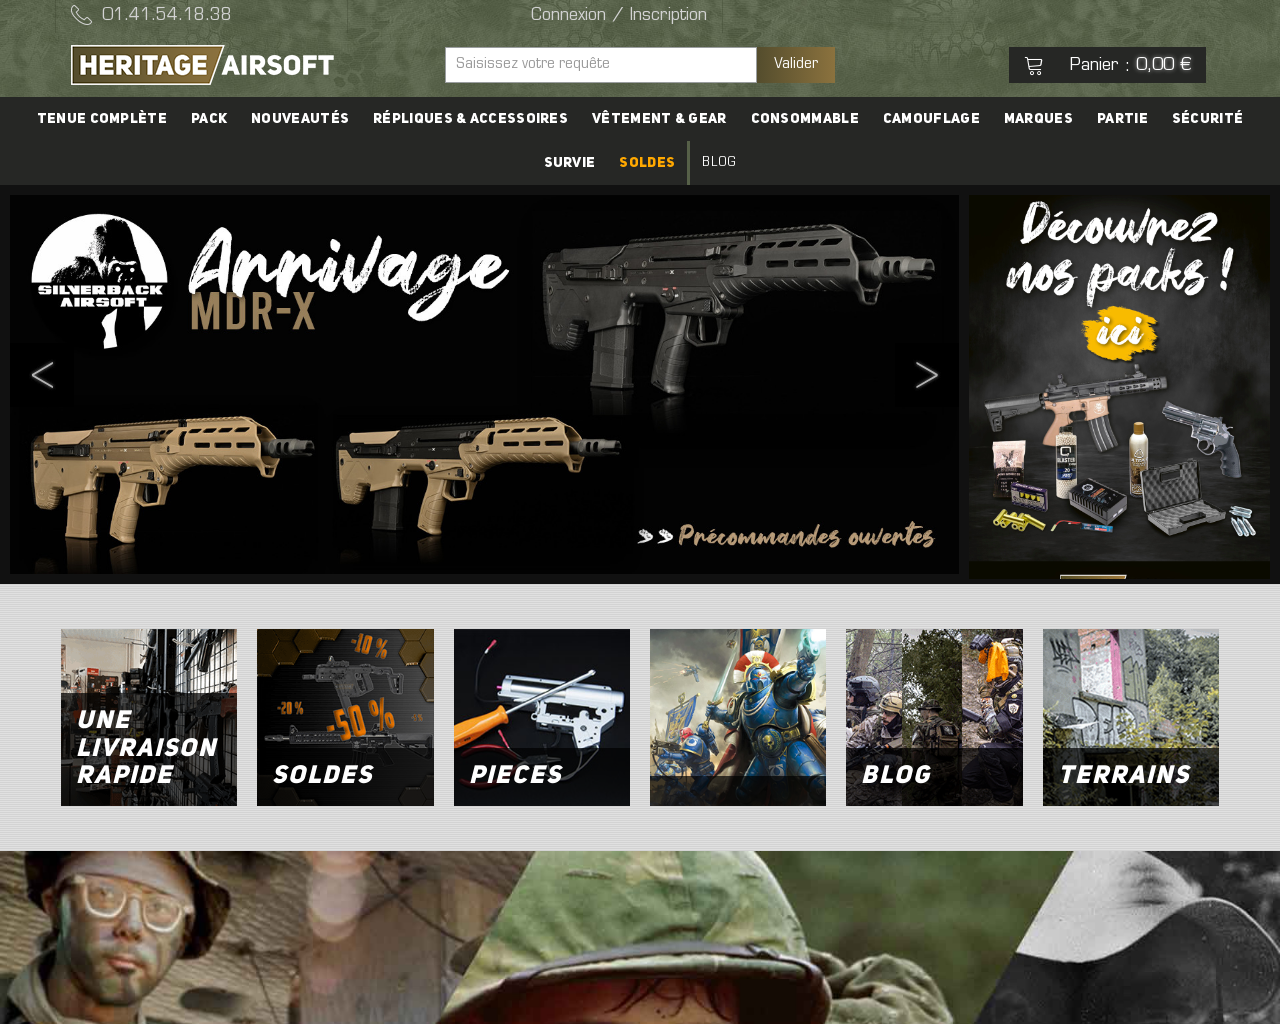 www.heritage-airsoft.com